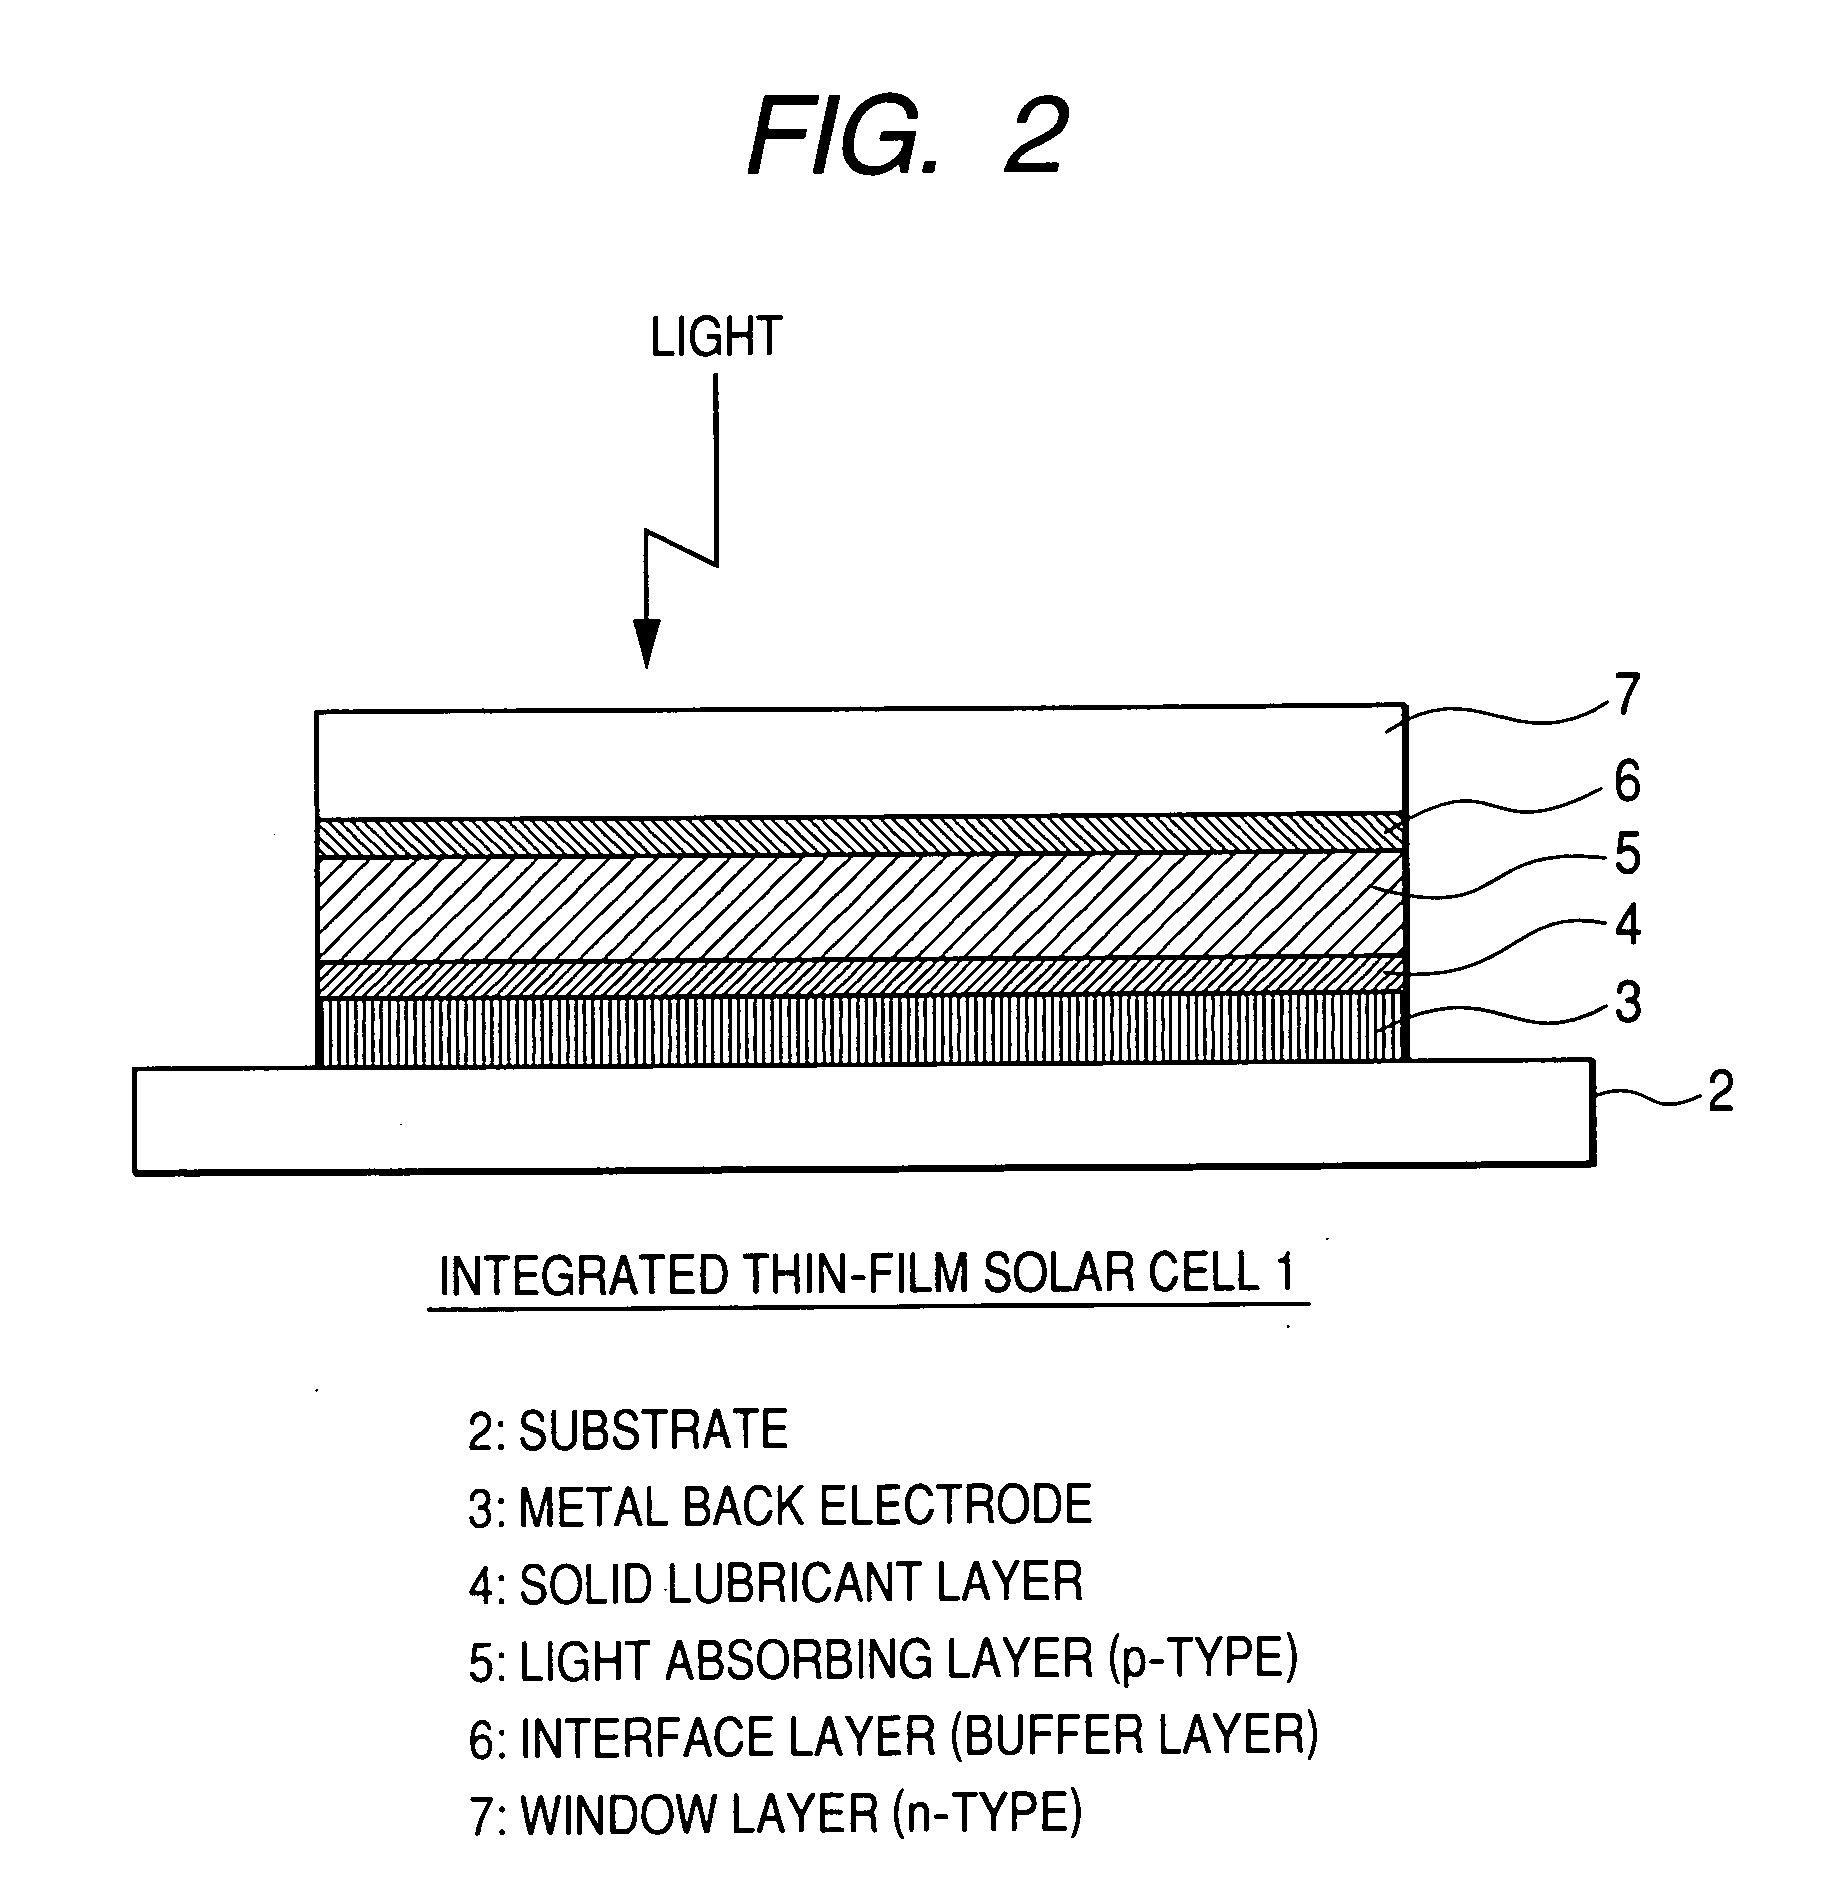 Integrated thin-film solar cell and process for producing the same